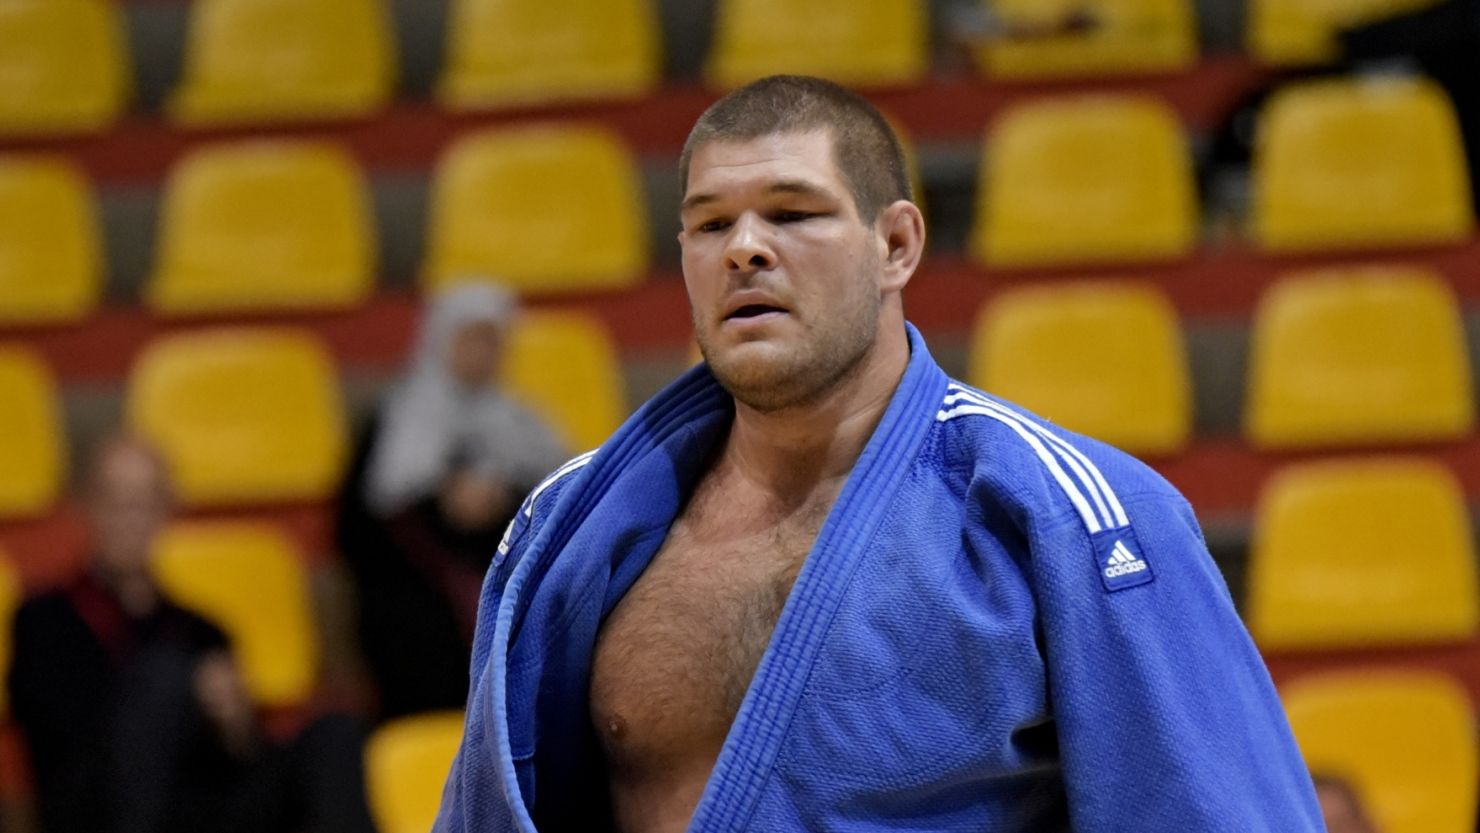 Andrew Melbourne is a military policeman hoping to go Tokyo 2020 as a heavyweight judoka.